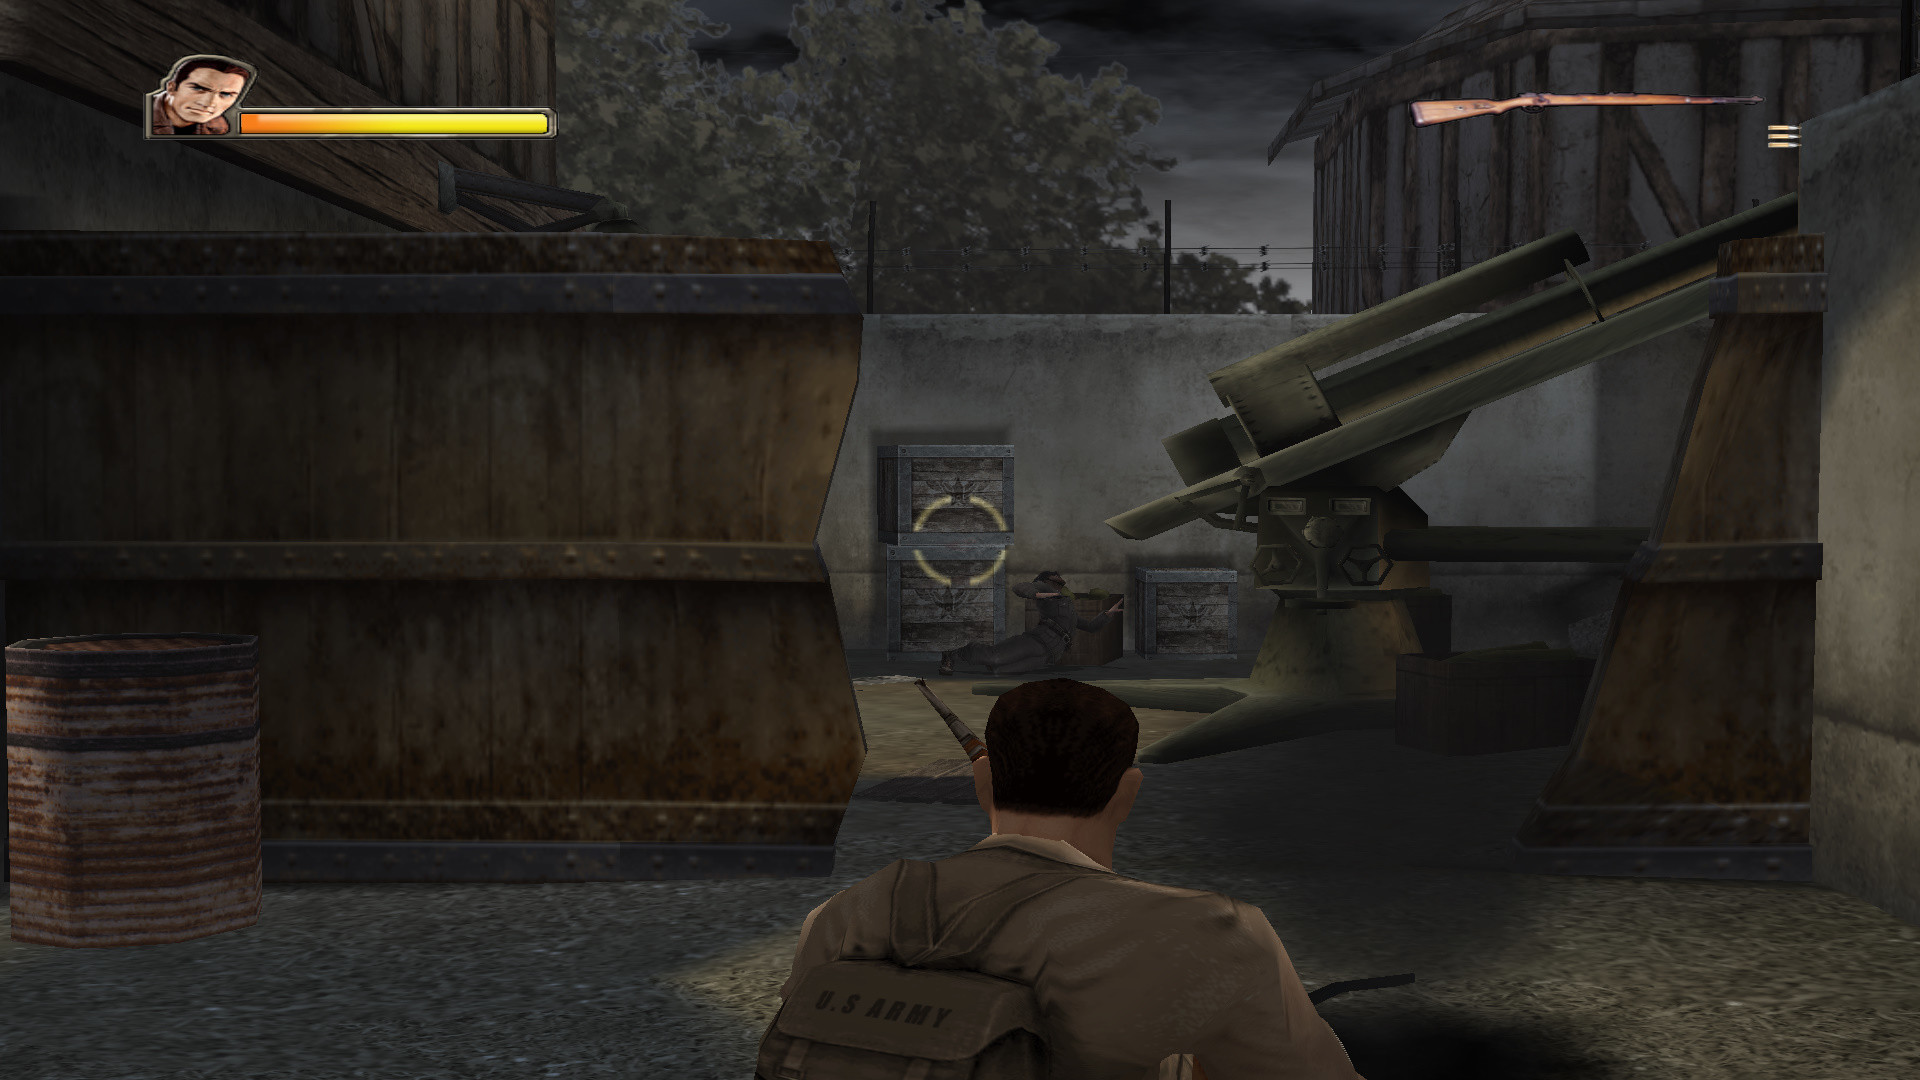 Medal of honor 2002. Airborne Troops: Countdown to d-Day. Игры 2004 в жанре экшен.